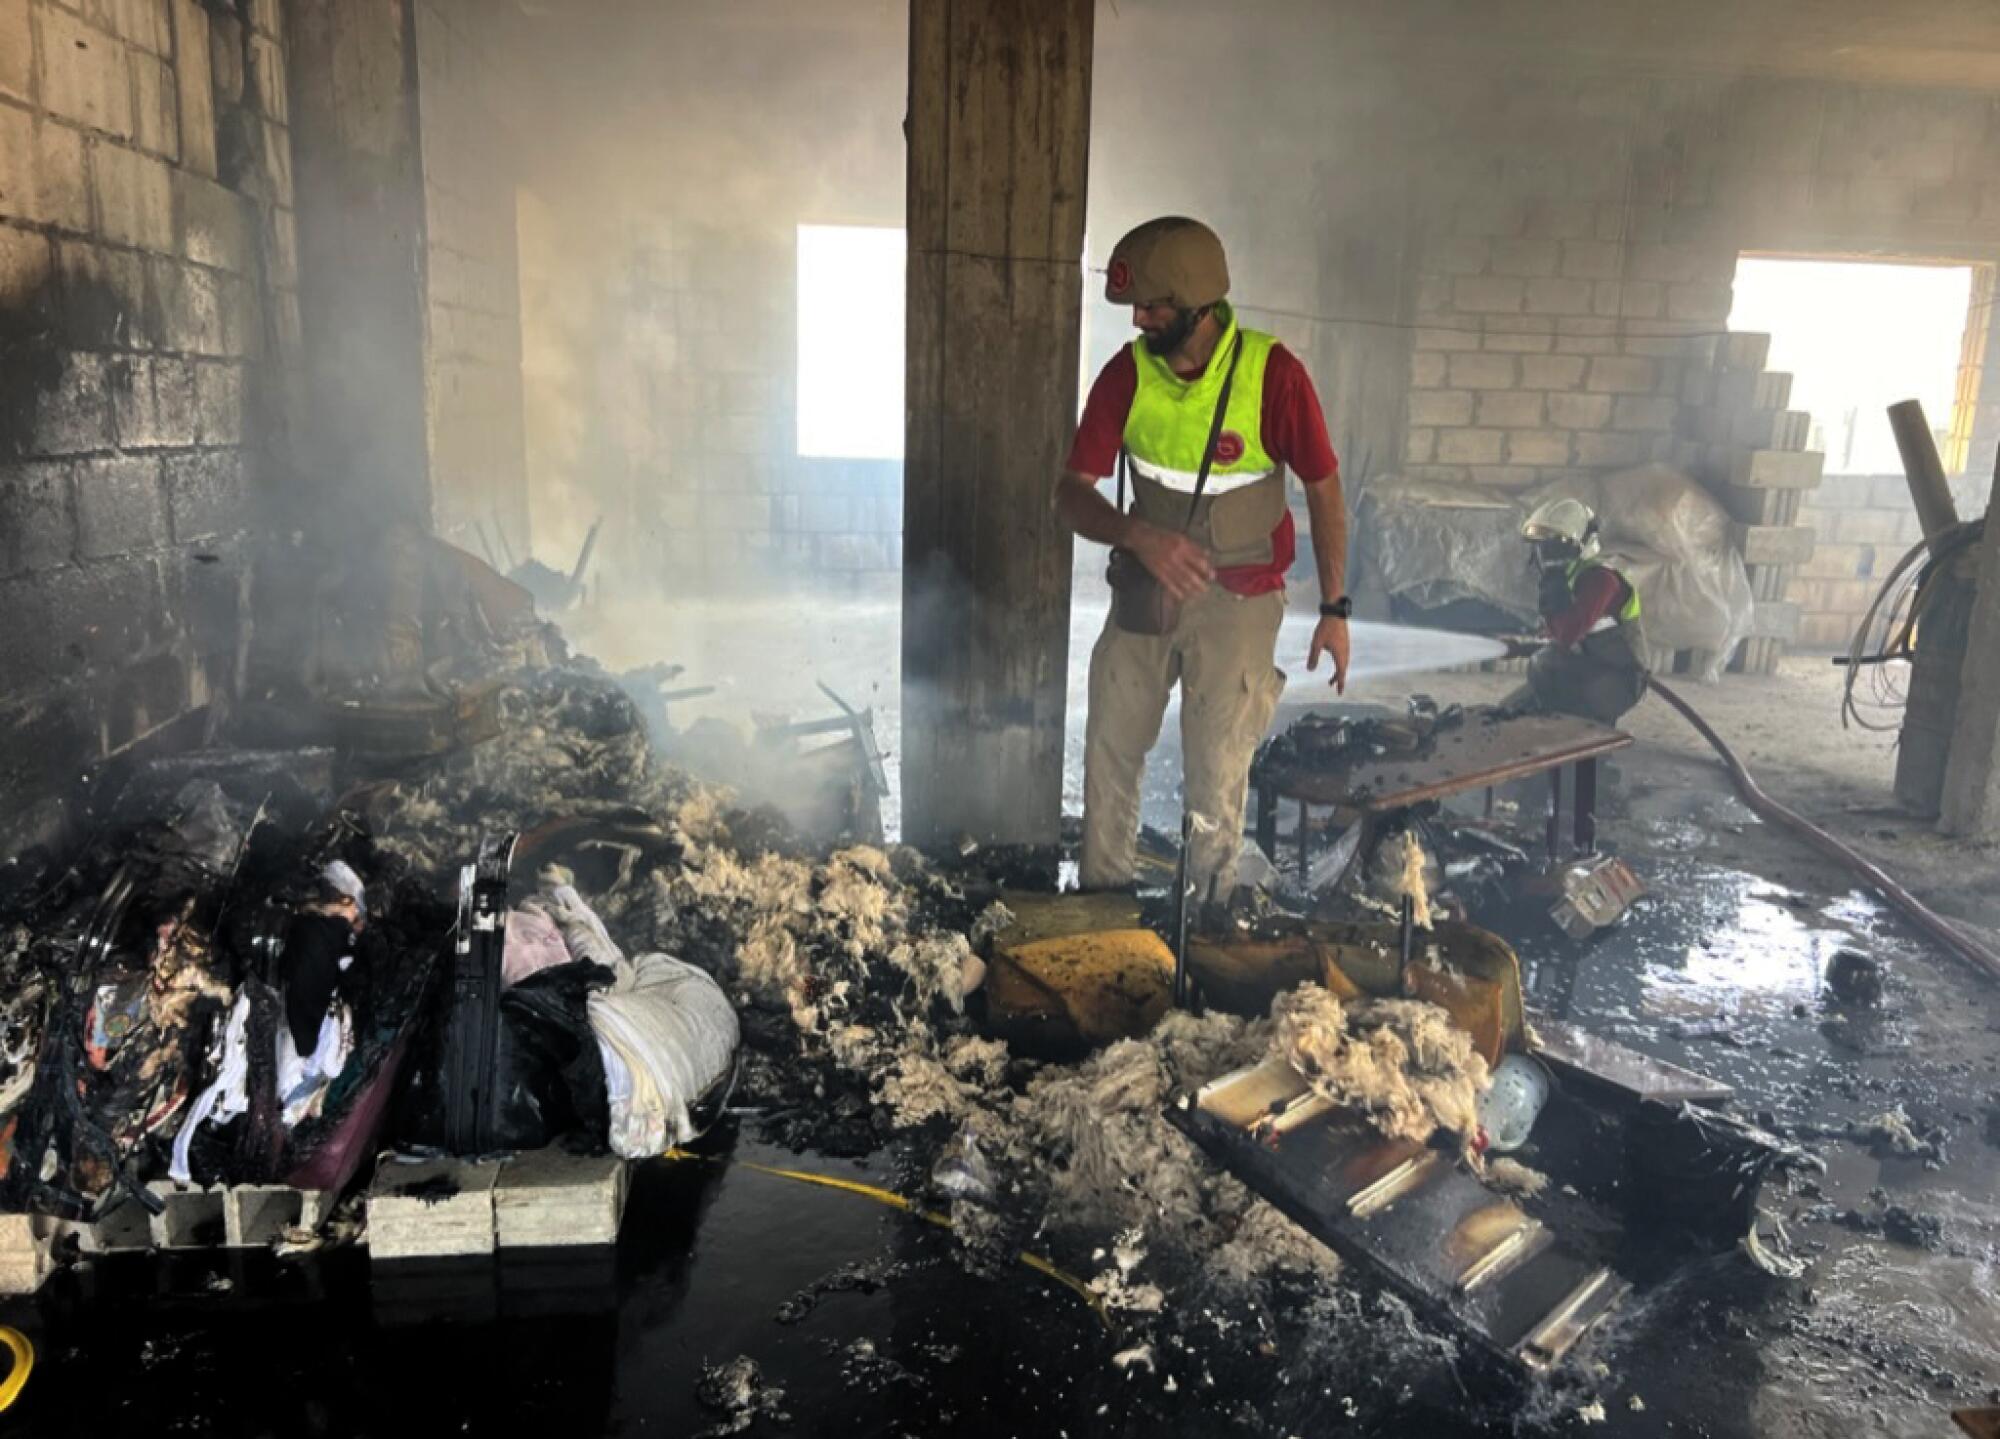 A man in a helmet and reflective vest stands amid smoking ashes inside a building.